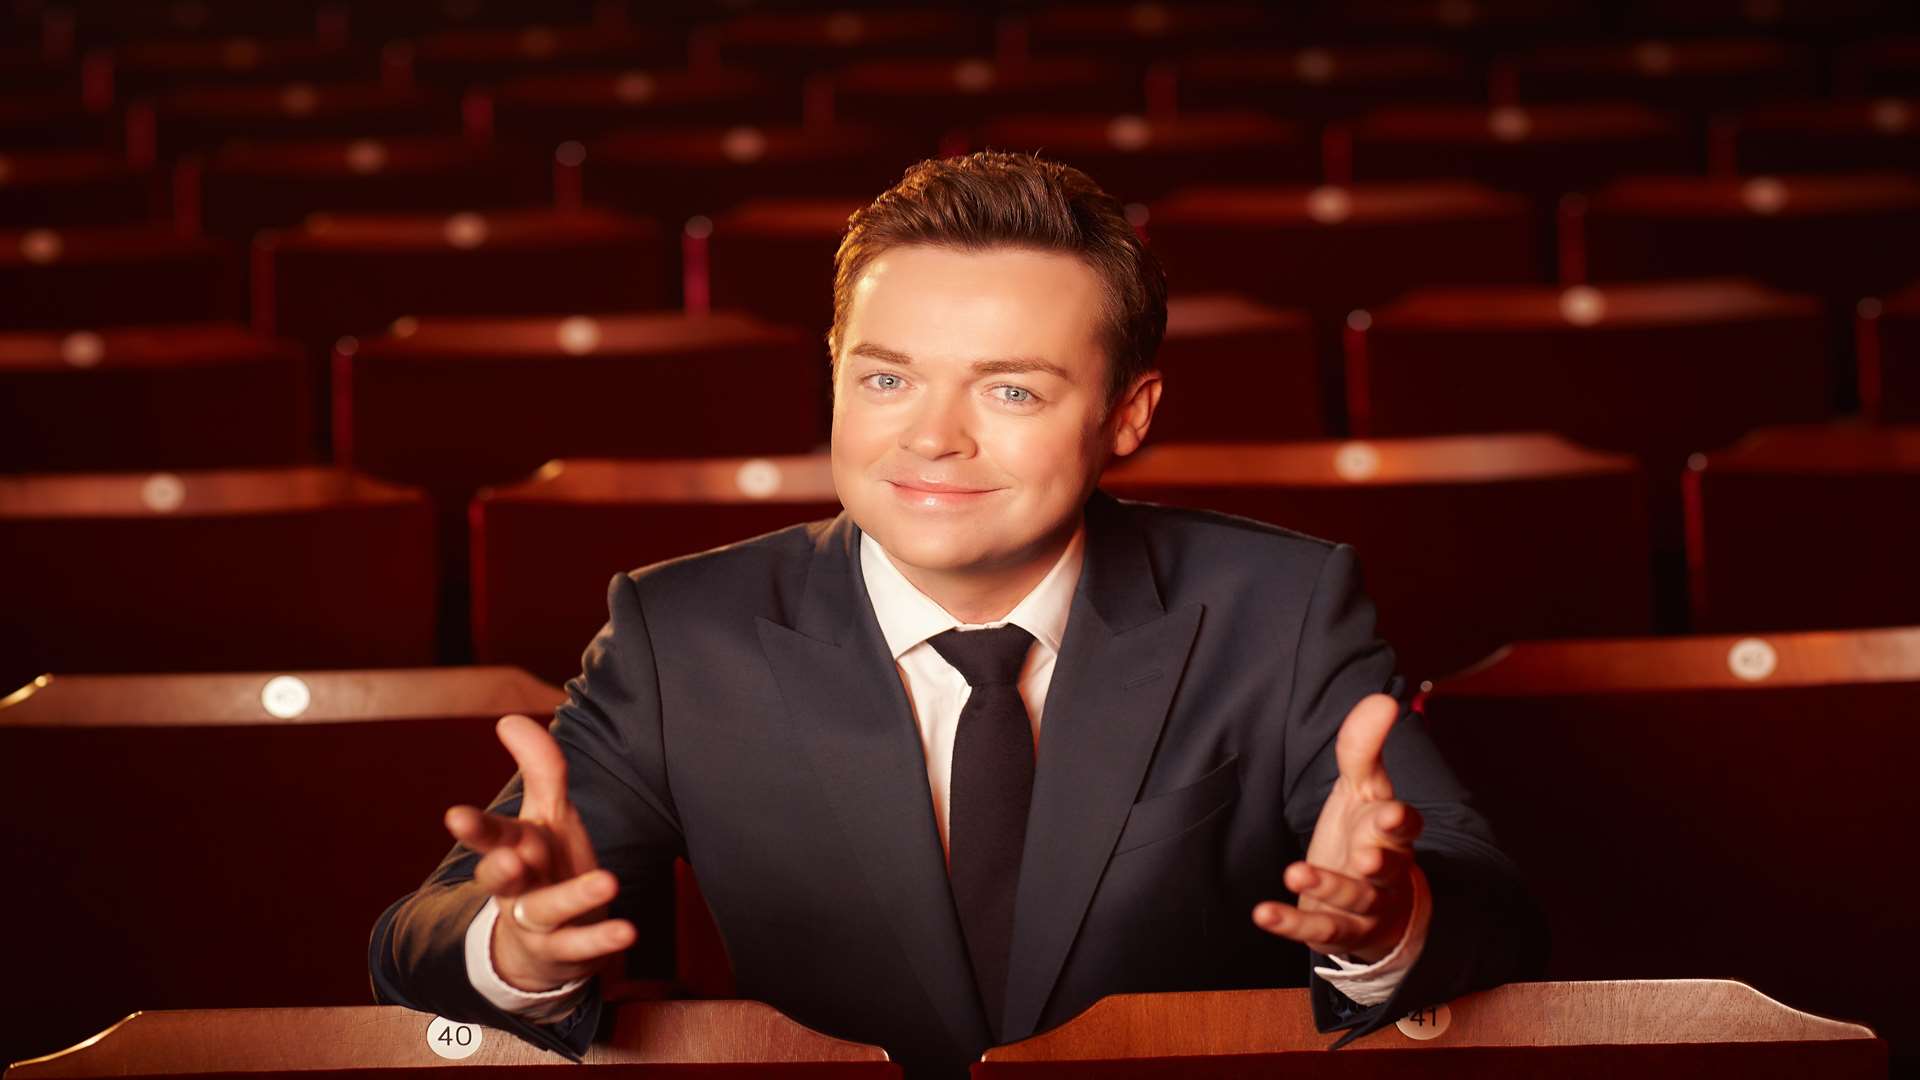 Stephen Mulhern will make an appearance at the Marlowe Theatre's gala evening on Sunday, October 9. Picture: Stephen Mulhern